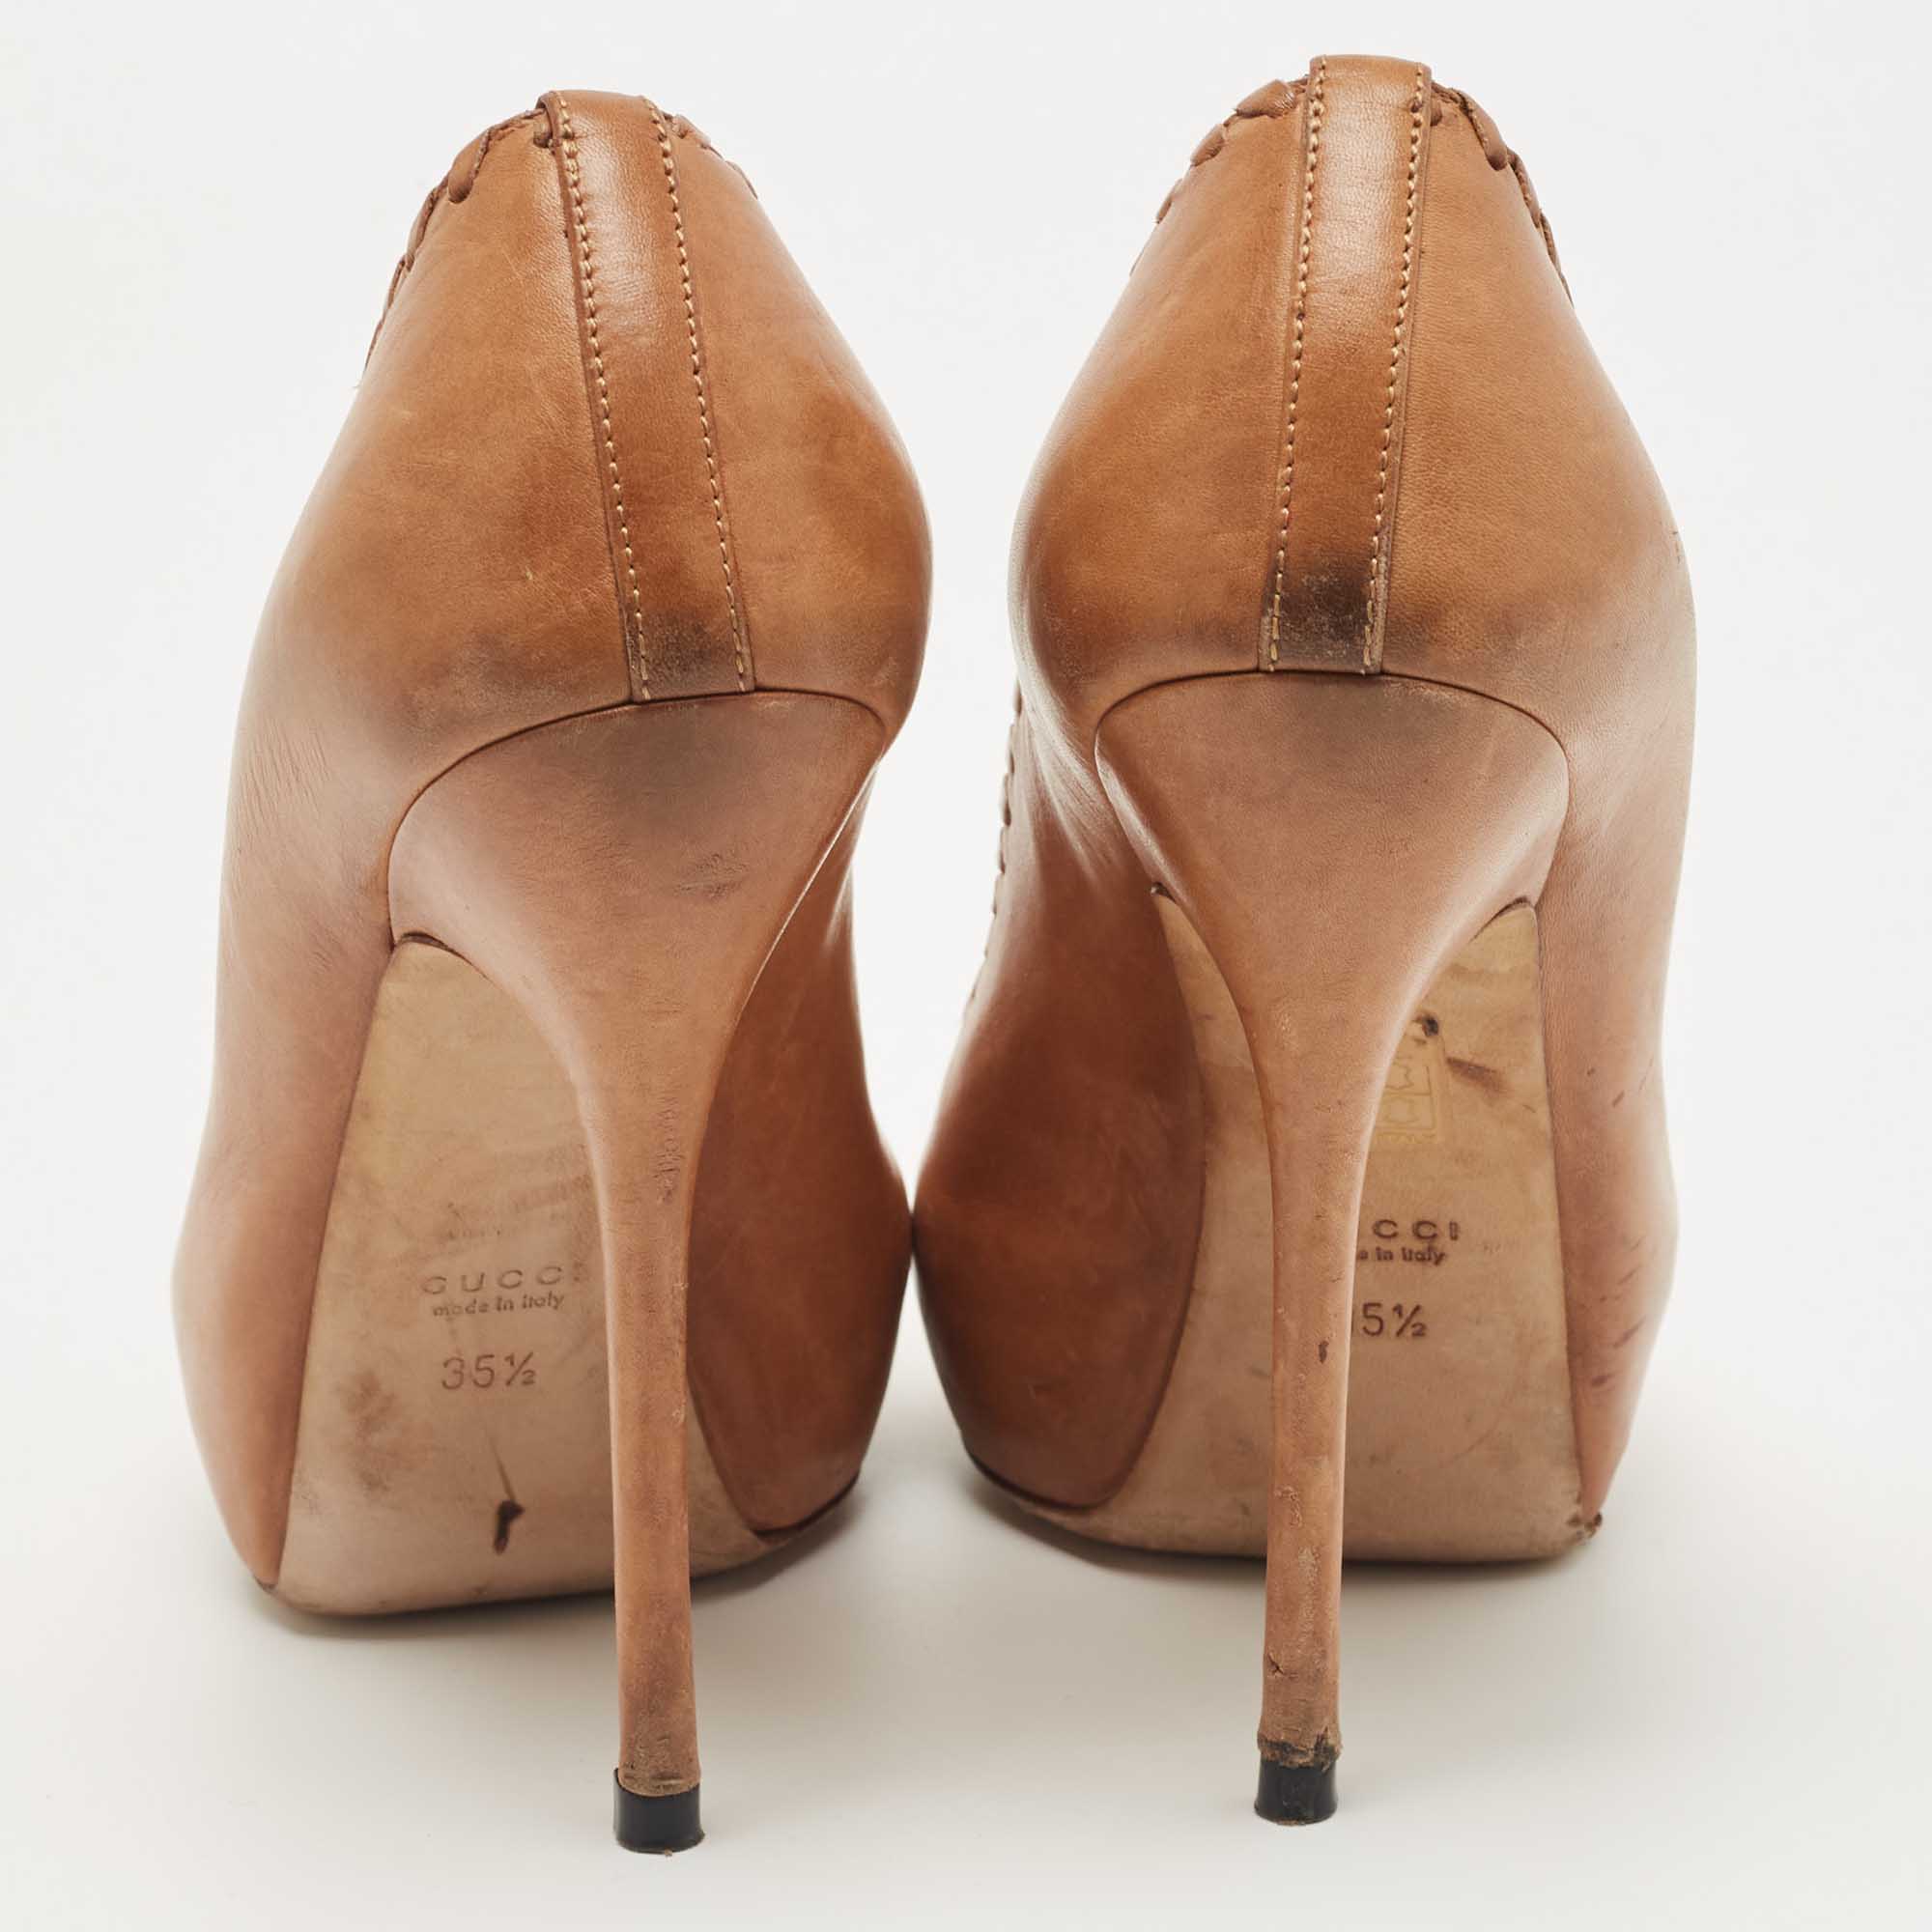 Gucci Tan Leather Whipstitch Peep Toe Pumps Size 35.5